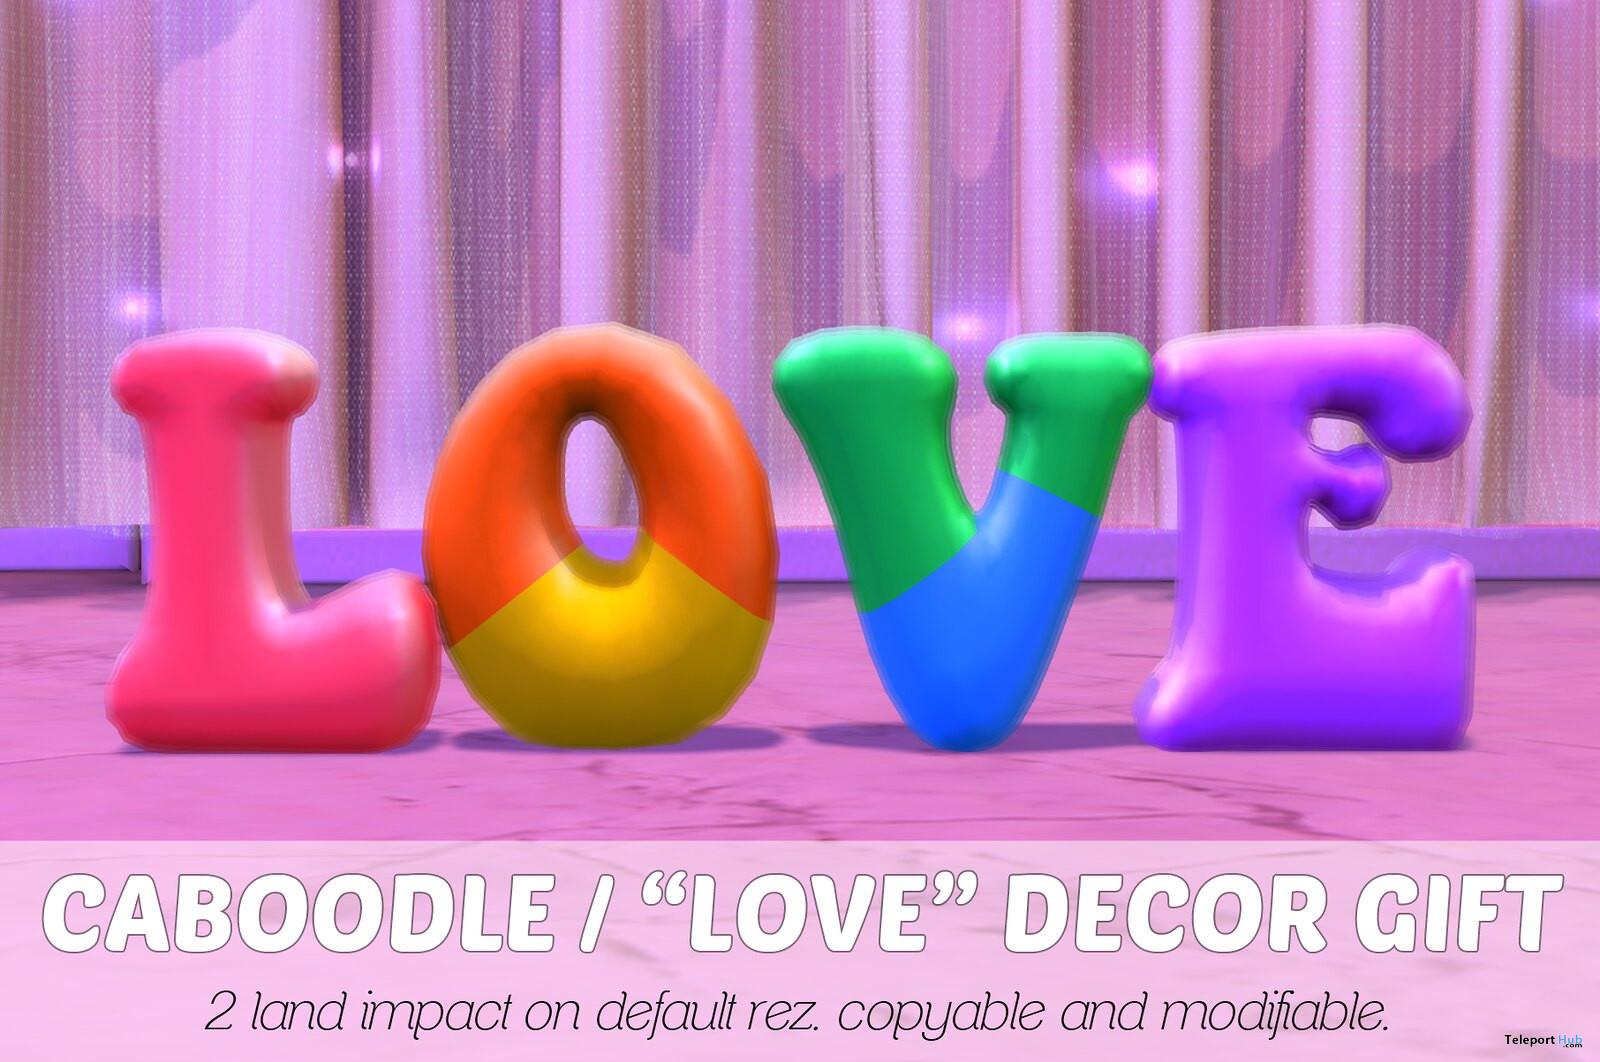 Love Decor June 2022 Gift by Caboodle - Teleport Hub - teleporthub.com